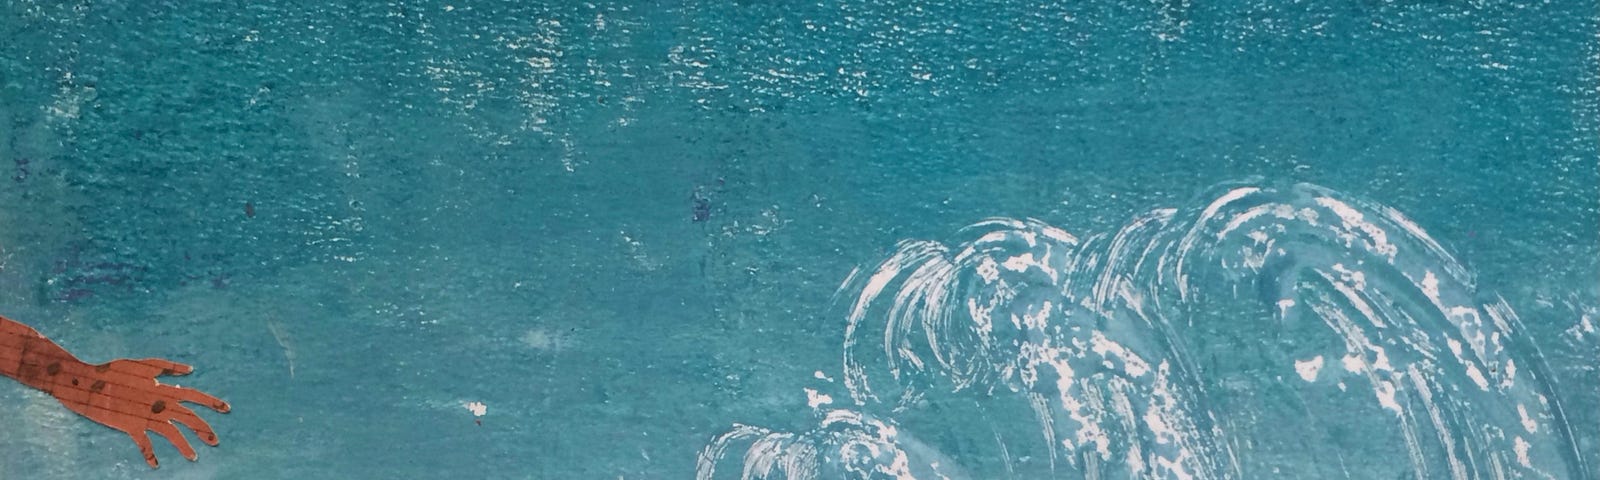 Mixed-media painting of blue waves, with a hand reaching from shore to two hands in the water.